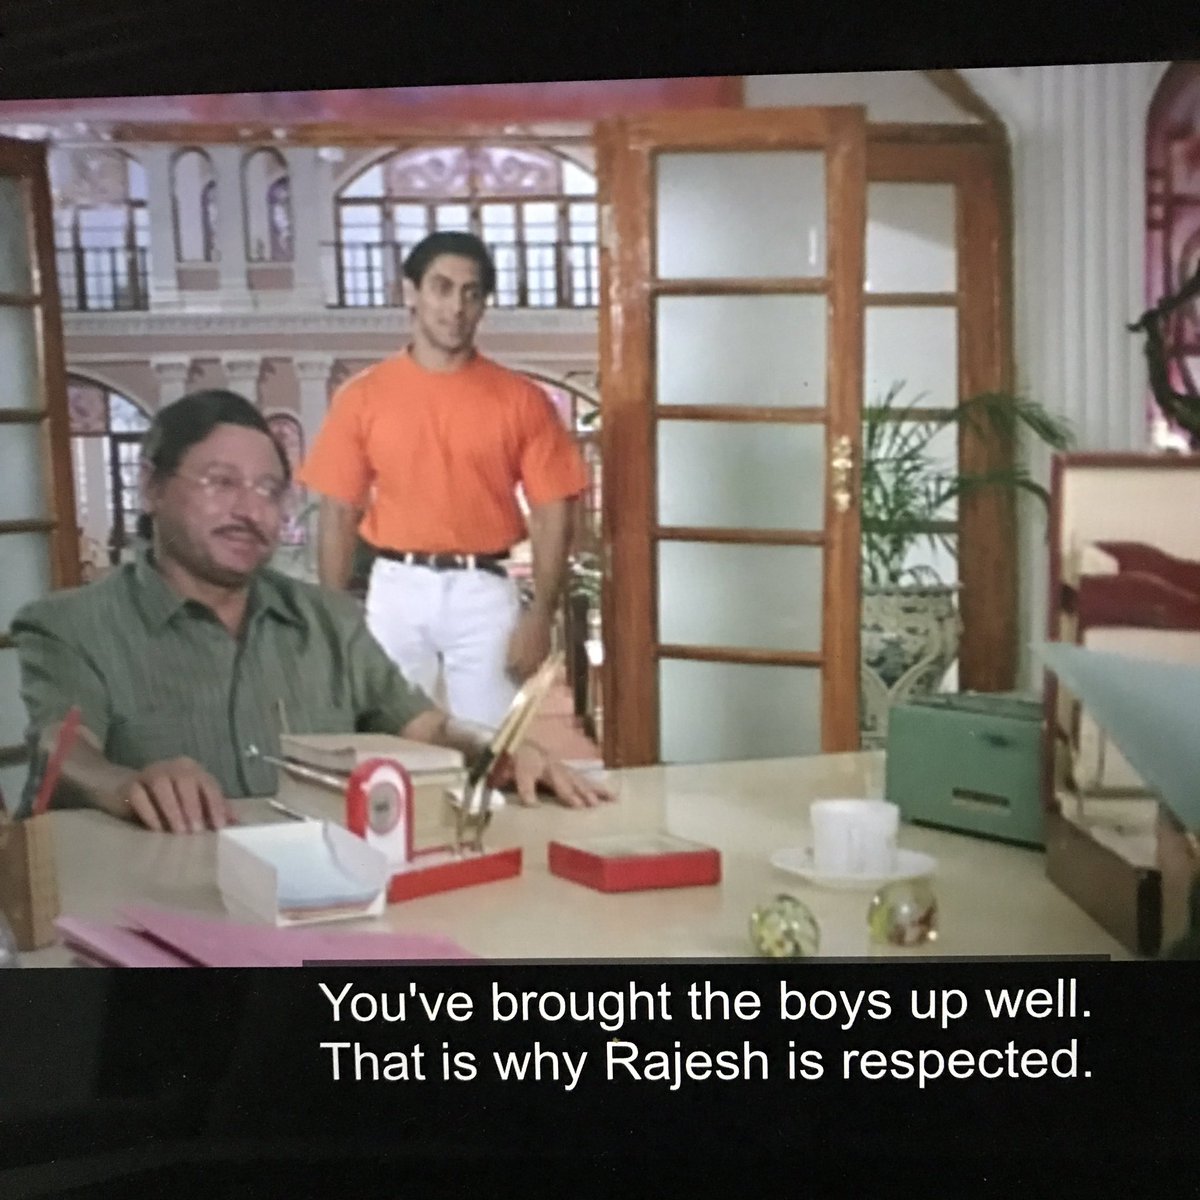 Men talk now—But Sanskari Uncle (guardian) has brought up Prem and Rajesh with lots of sanskaar. So now there’s a secret alliance talk because there’s a sanskari seedhi saadhi girl with a sweet temperament who is perfect for Rajesh.